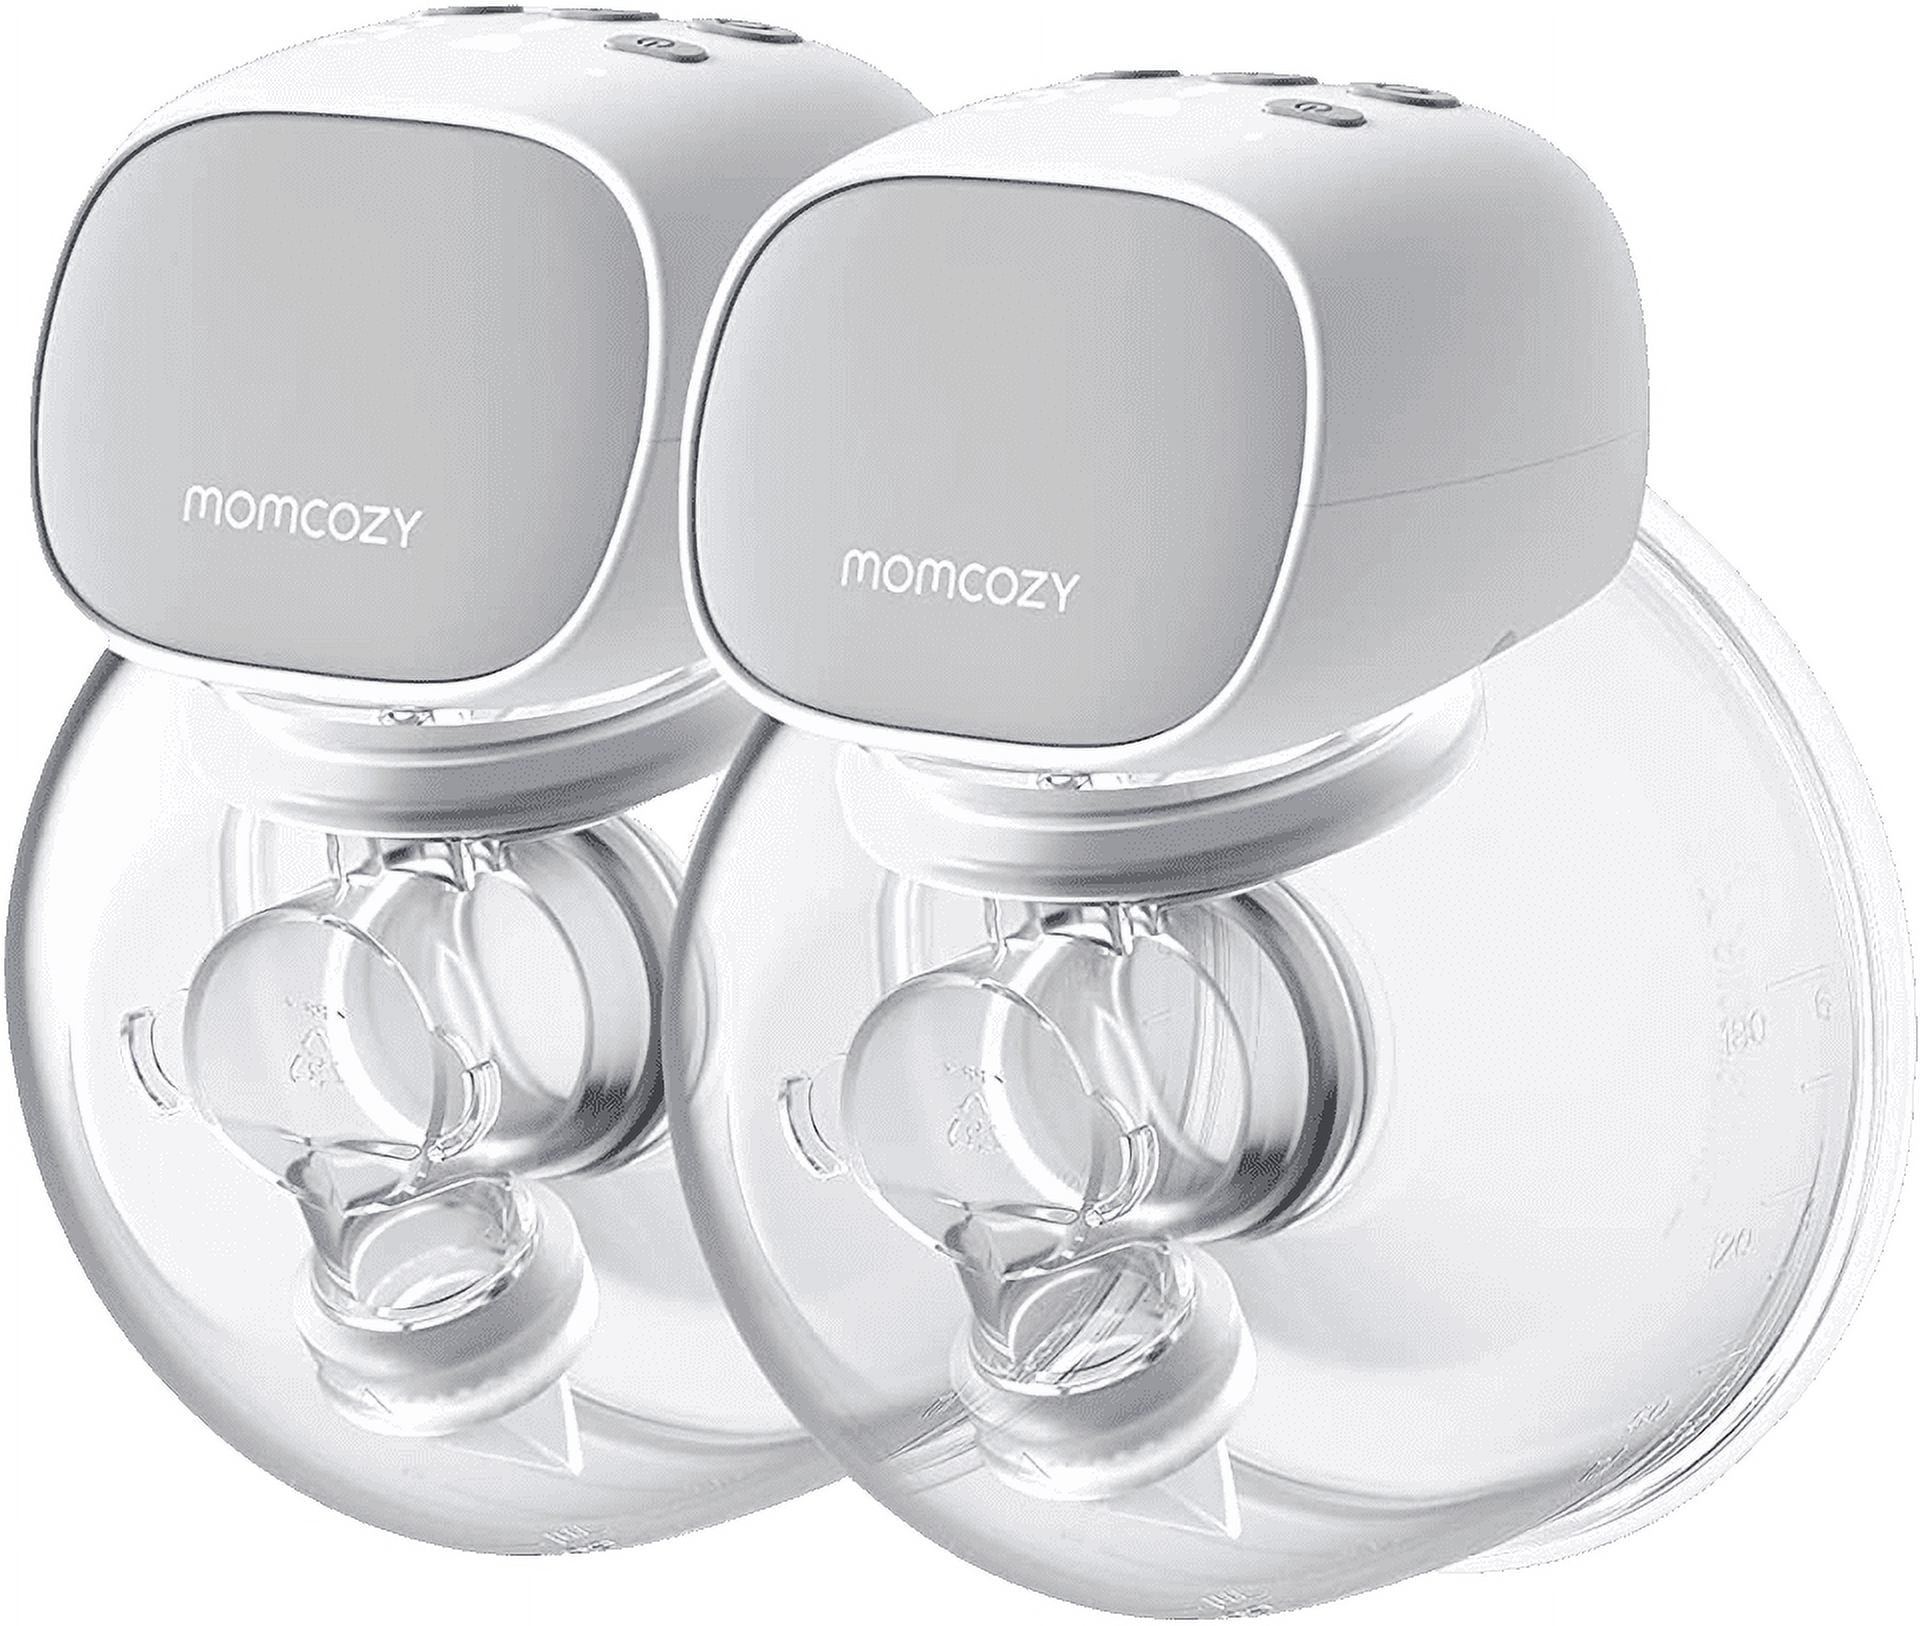 Momcozy Breast Pump Milk Collector for S9 Pro S12 Pro, Made by Momcozy, 1Pc